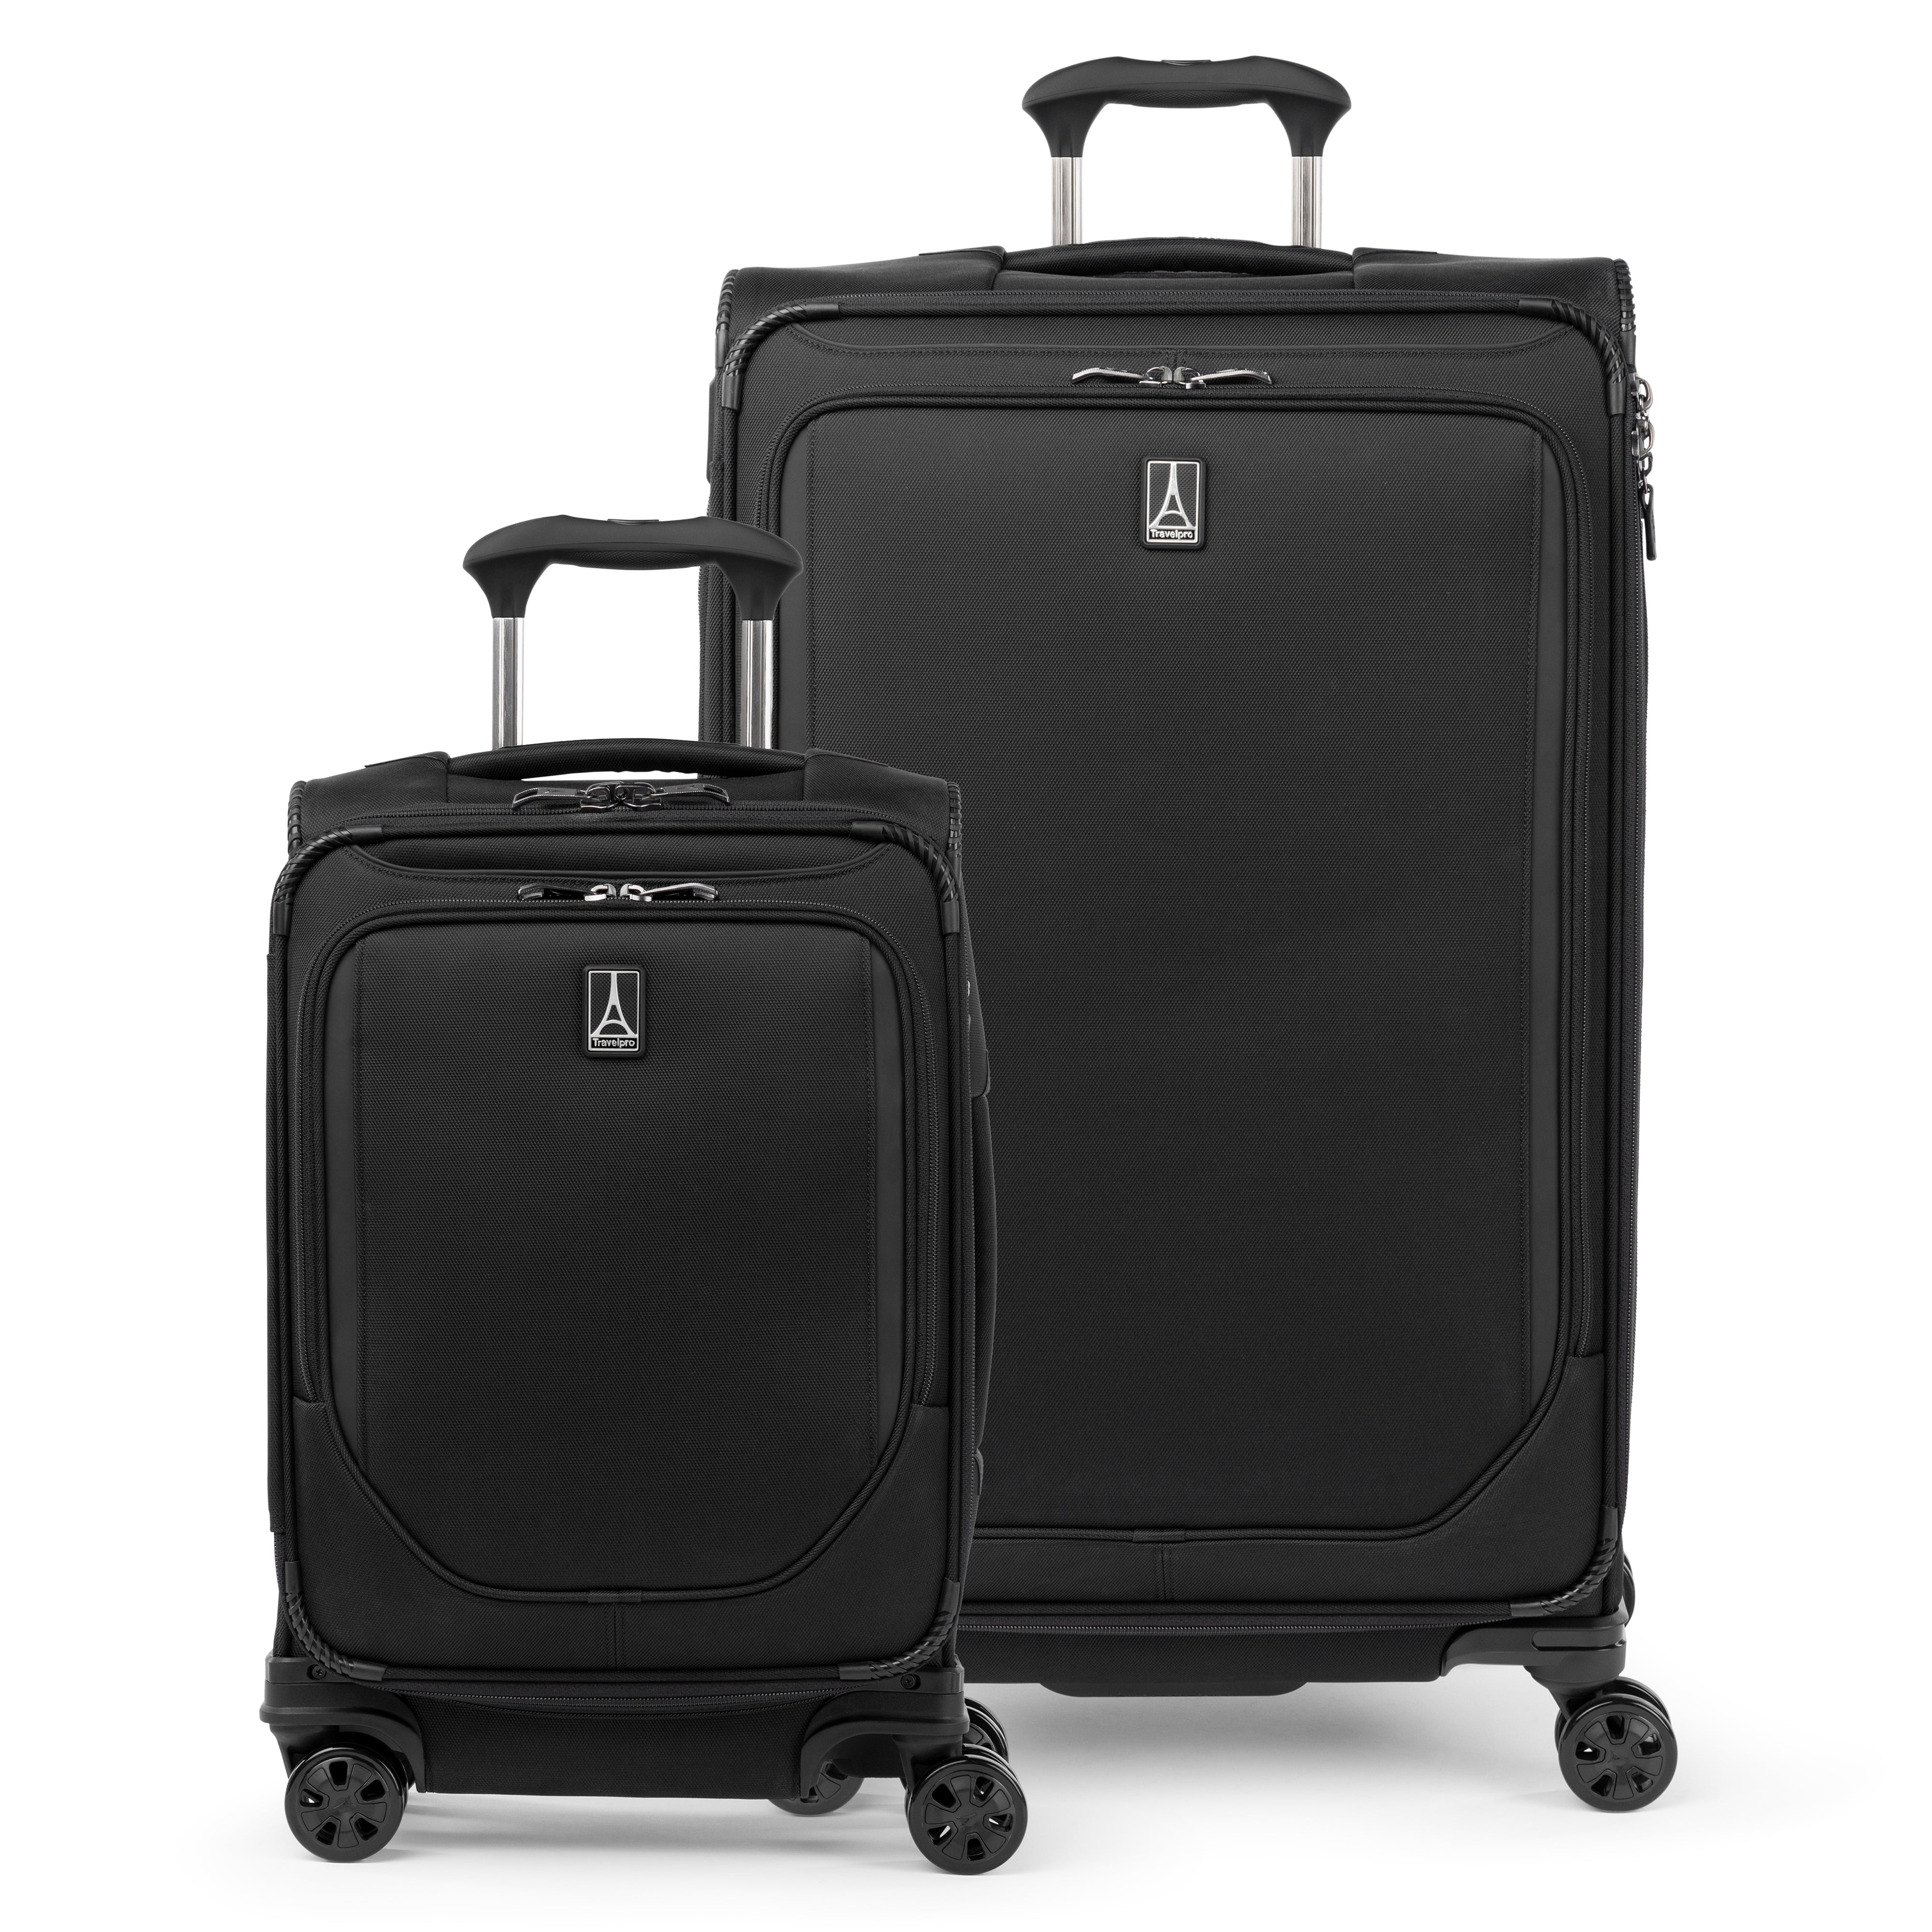 Crew™ Classic Carry-On / Large Check-in Luggage Set